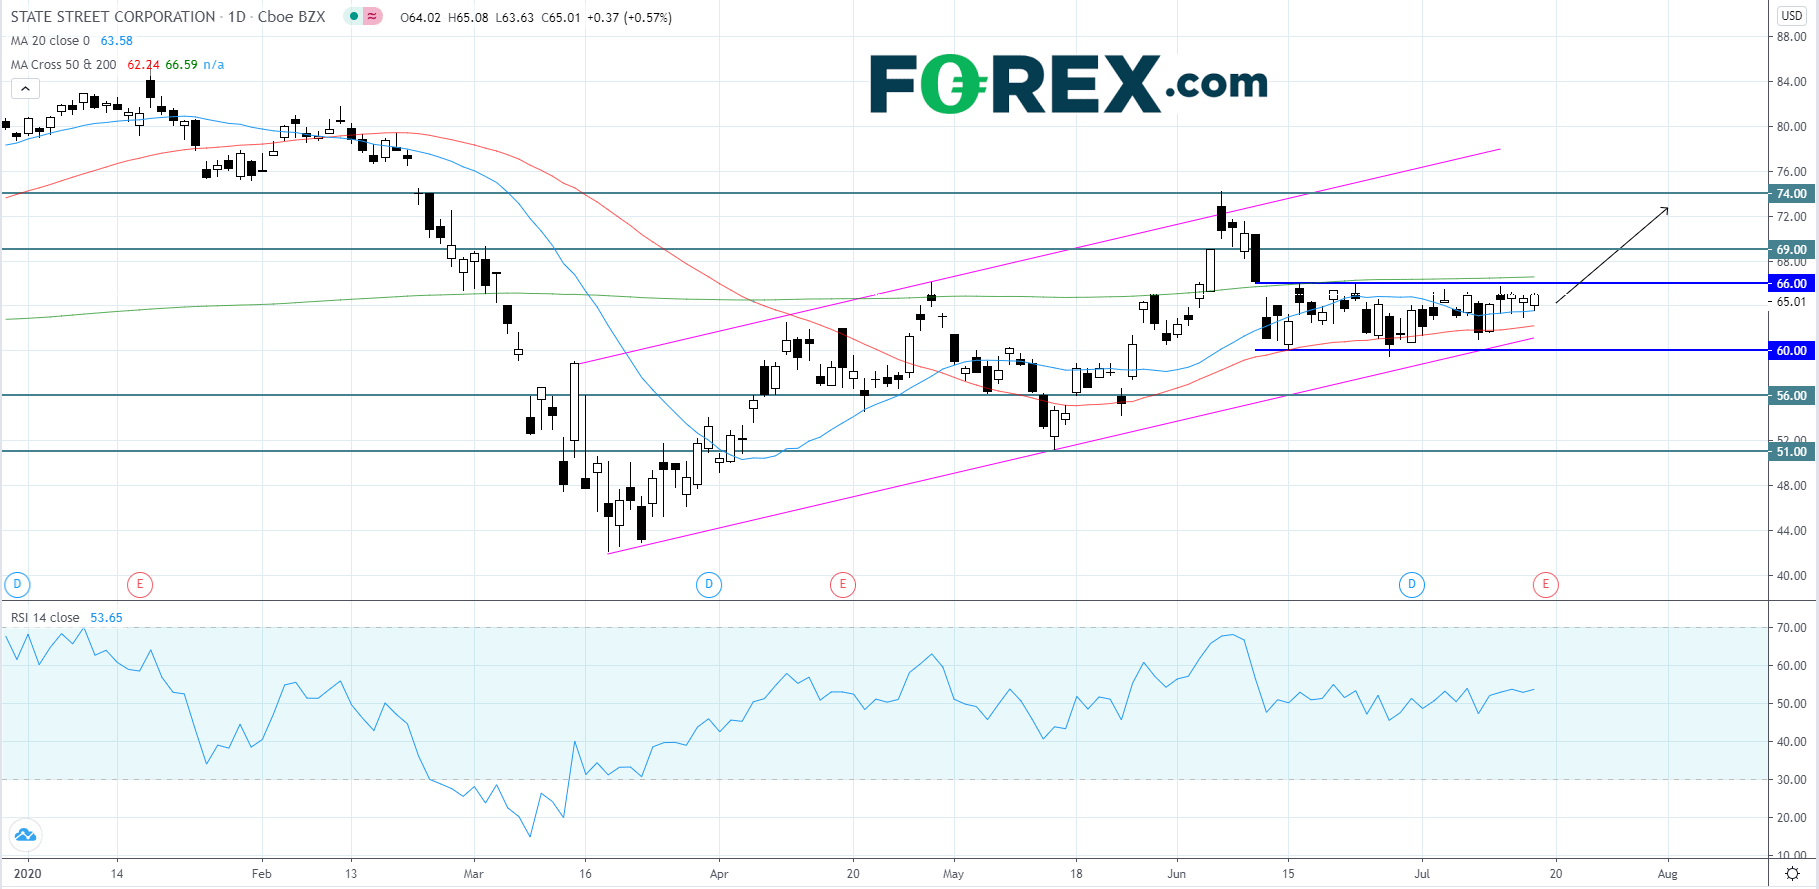 Chart analysis of State Street. Published in July 2020 by FOREX.com